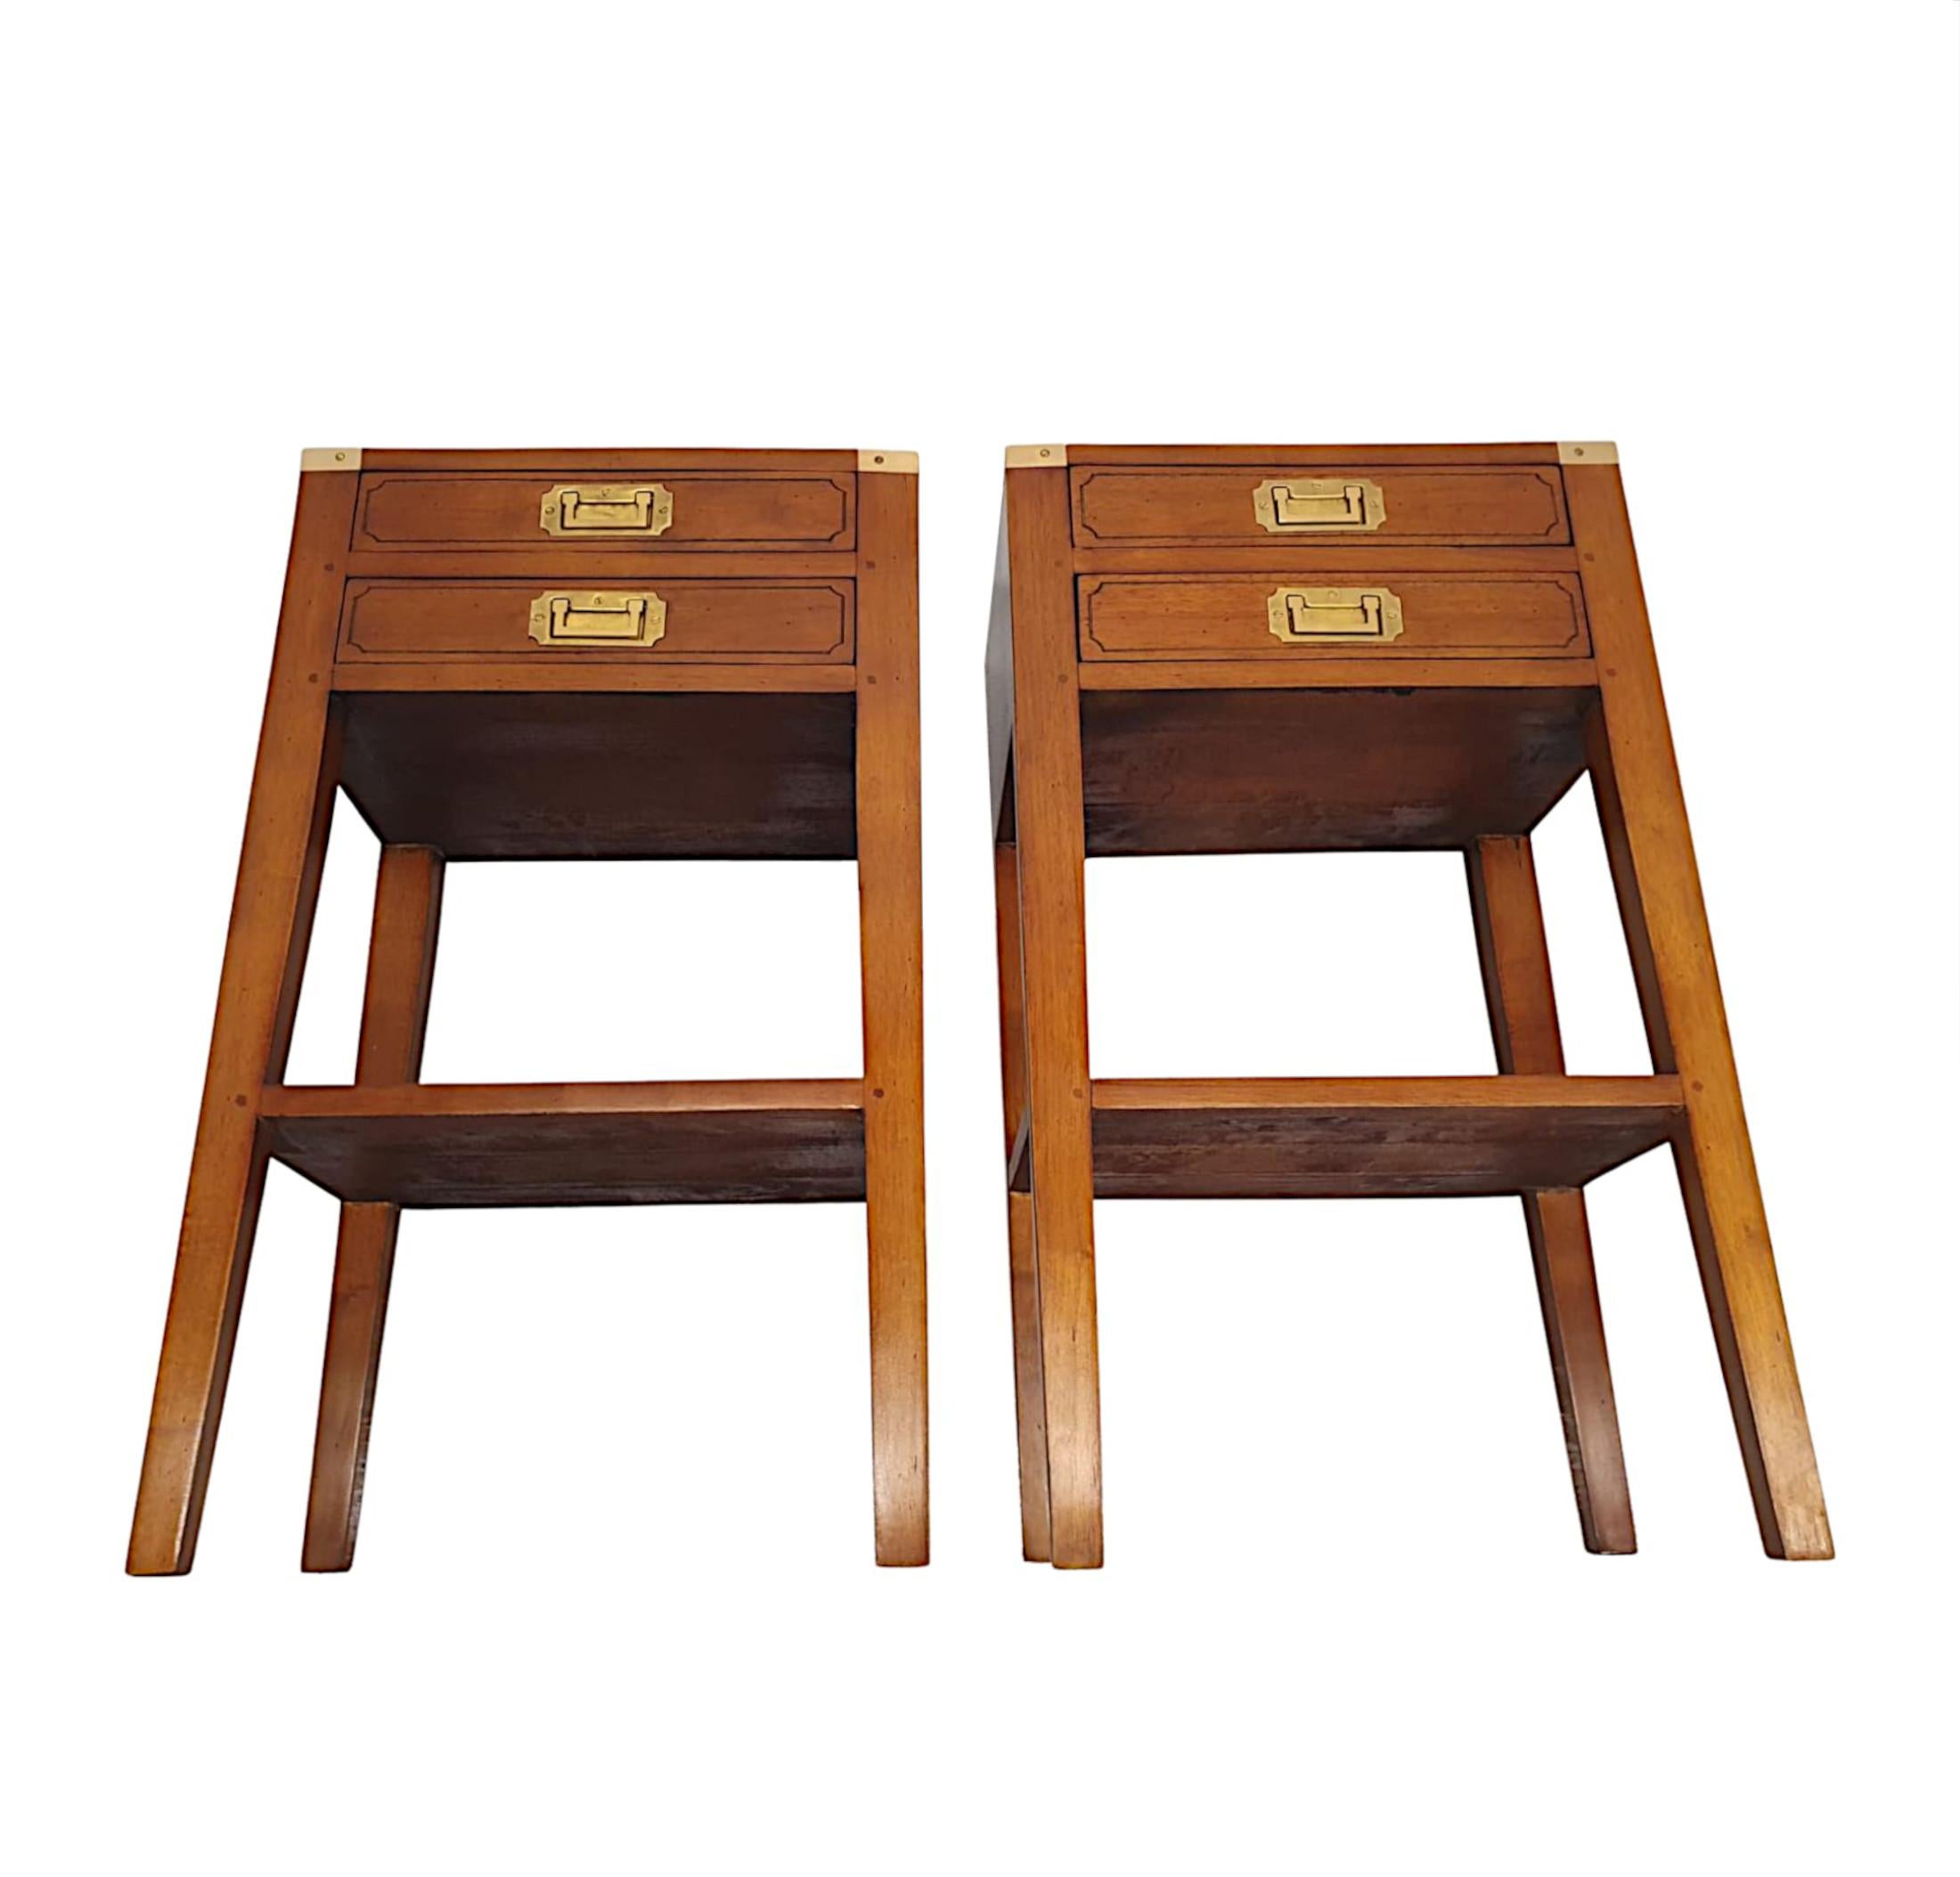 Contemporary  A Fabulous Pair of Campaign Style Side Tables